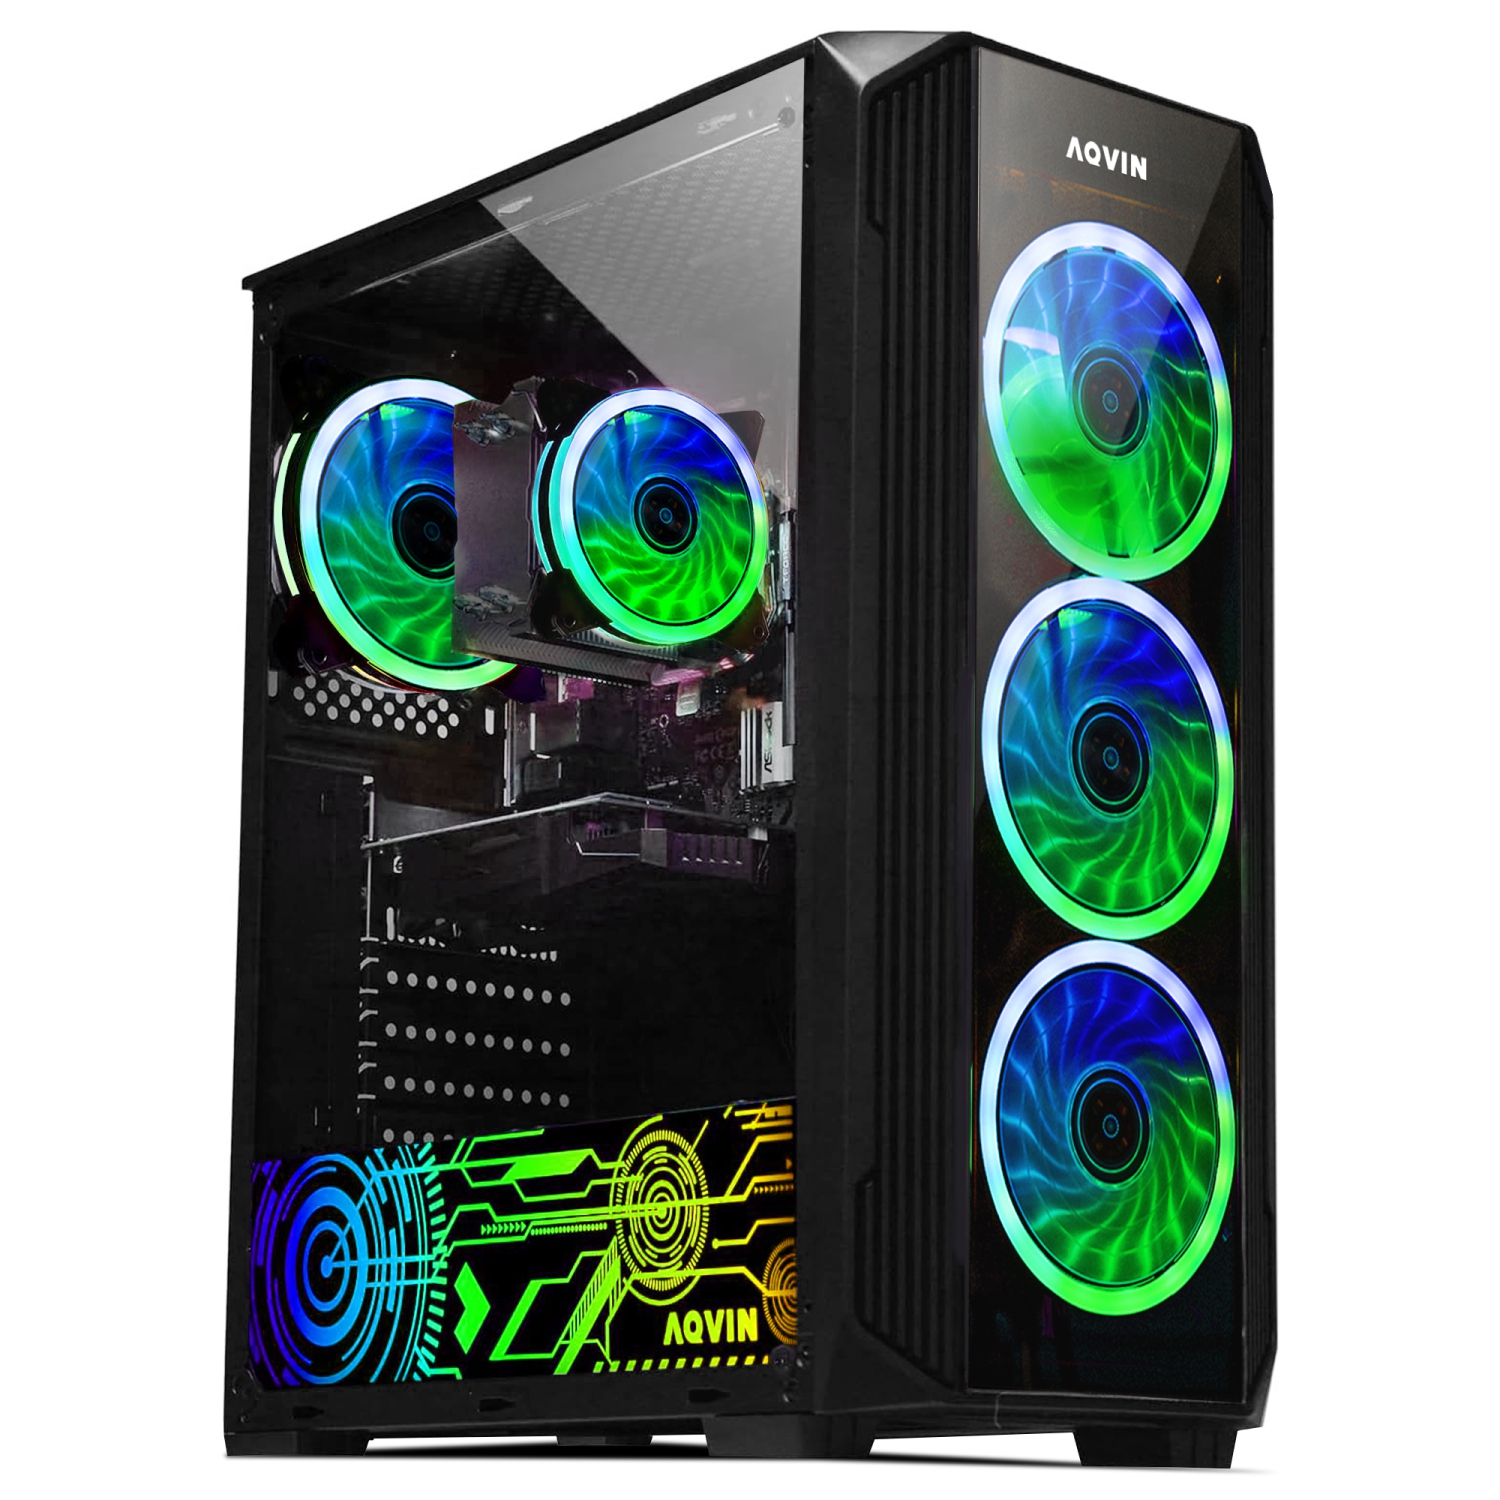 AQVIN ZForce Gaming PC Tower - Intel Core i7 Processor up to 4.6Ghz 32GB DDR4 RAM 1TB SSD GeForce RTX 3060 12GB DDR6 HDMI, RGB Keyboard Mouse Windows 11 Pro WIFI - Only at BestBuy